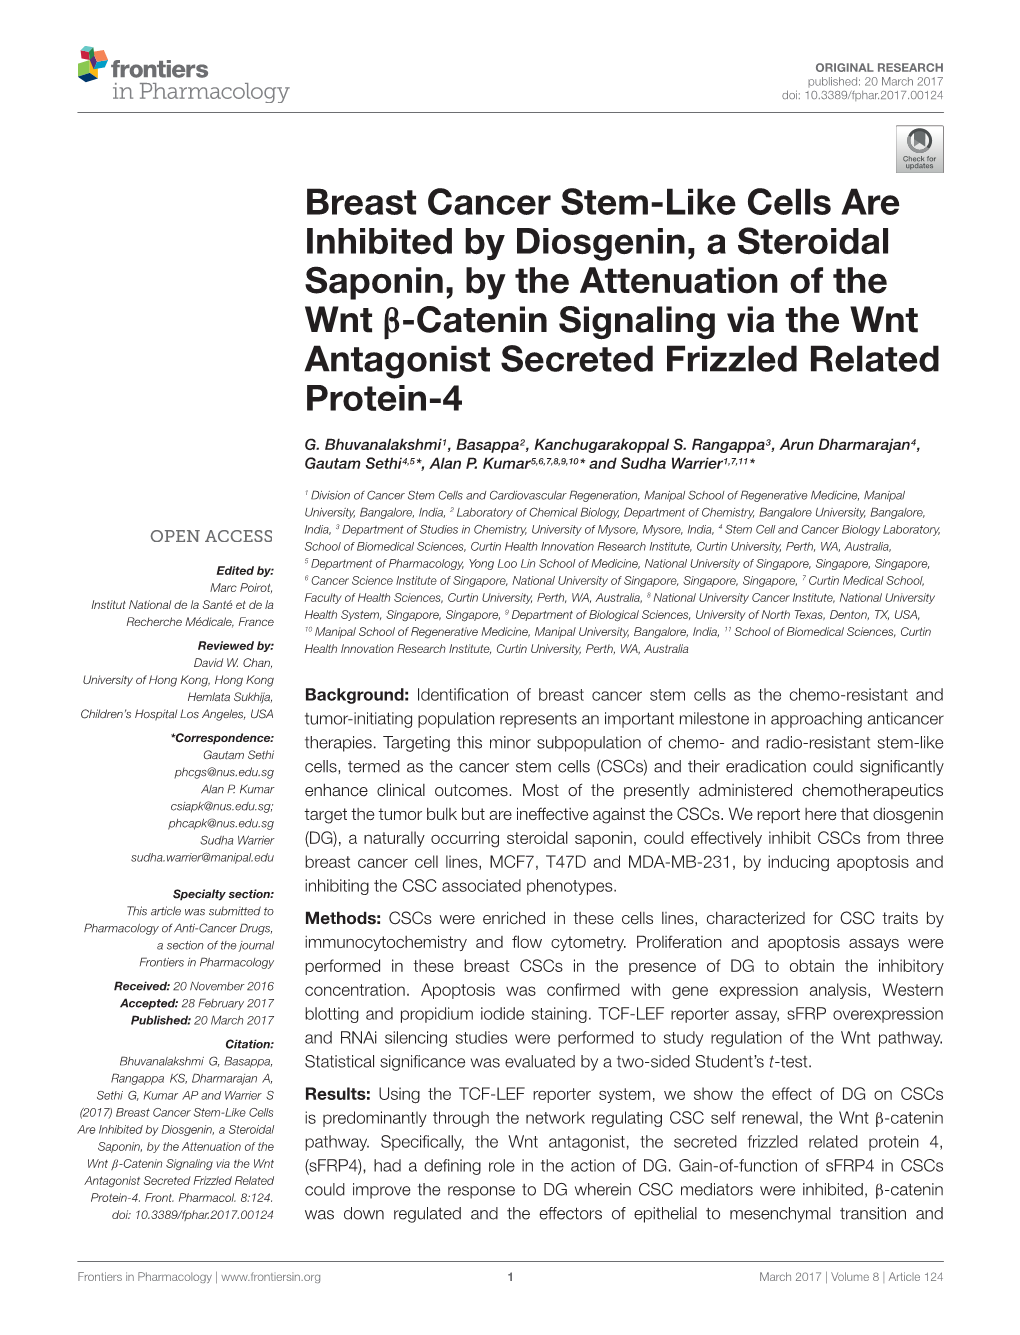 Breast Cancer Stem-Like Cells Are Inhibited by Diosgenin, a Steroidal